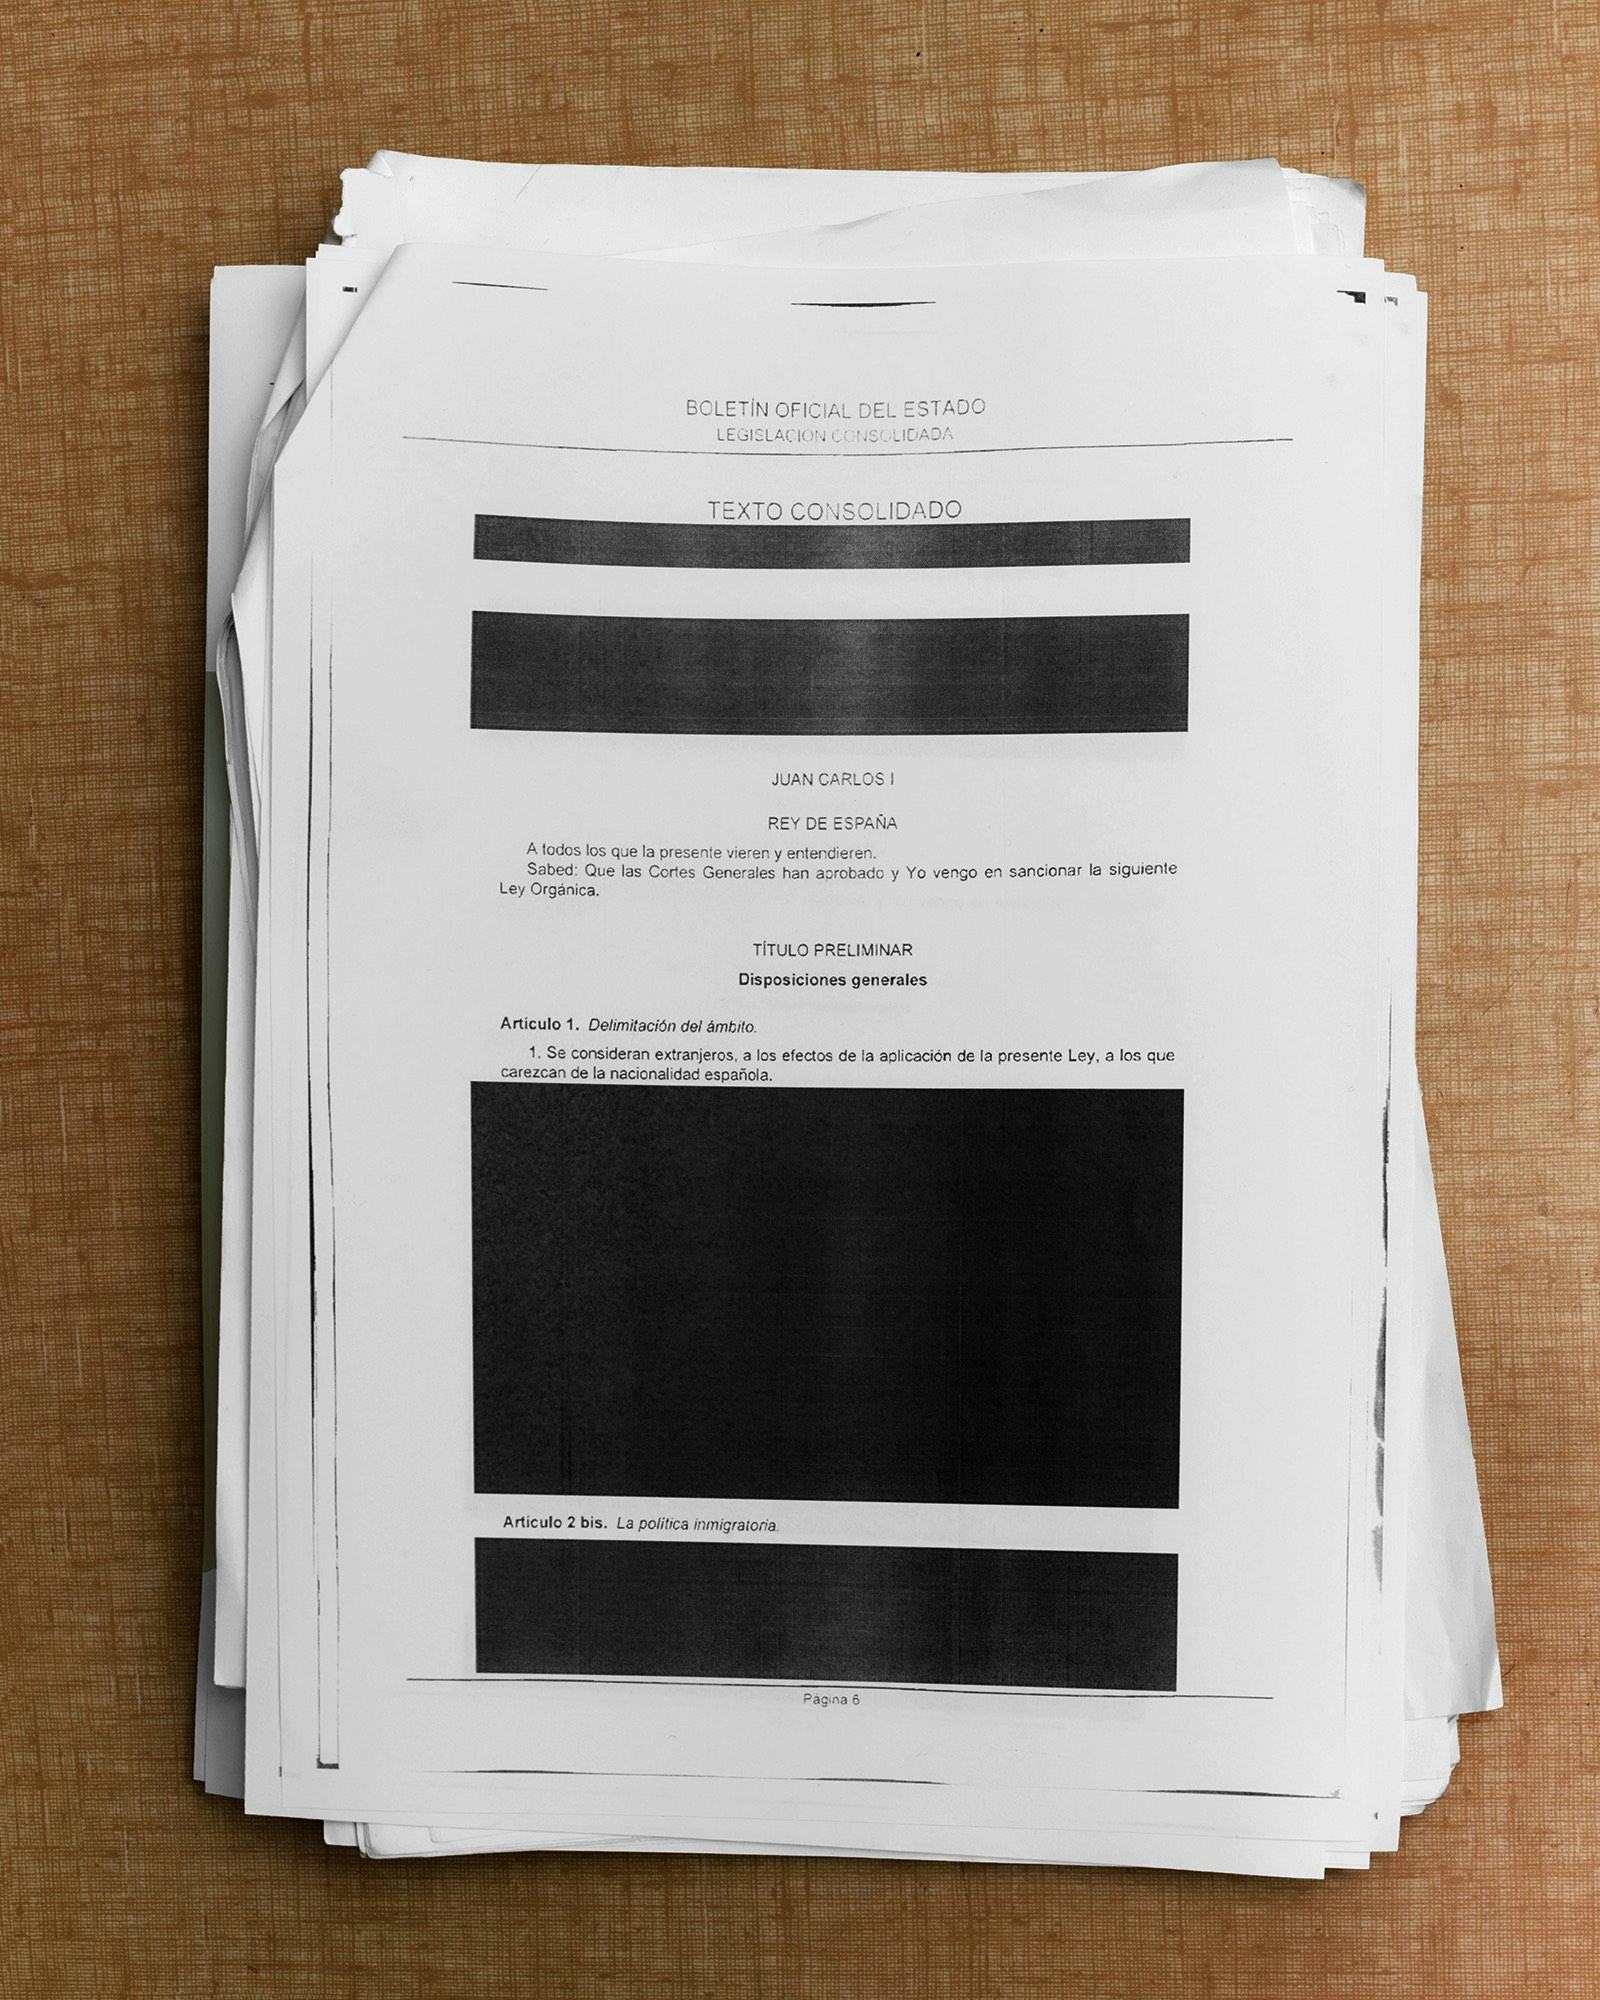 Image of a stack of paper printed with the Spanish immigration law, including blacked-out parts. © Felipe Romero Beltrán